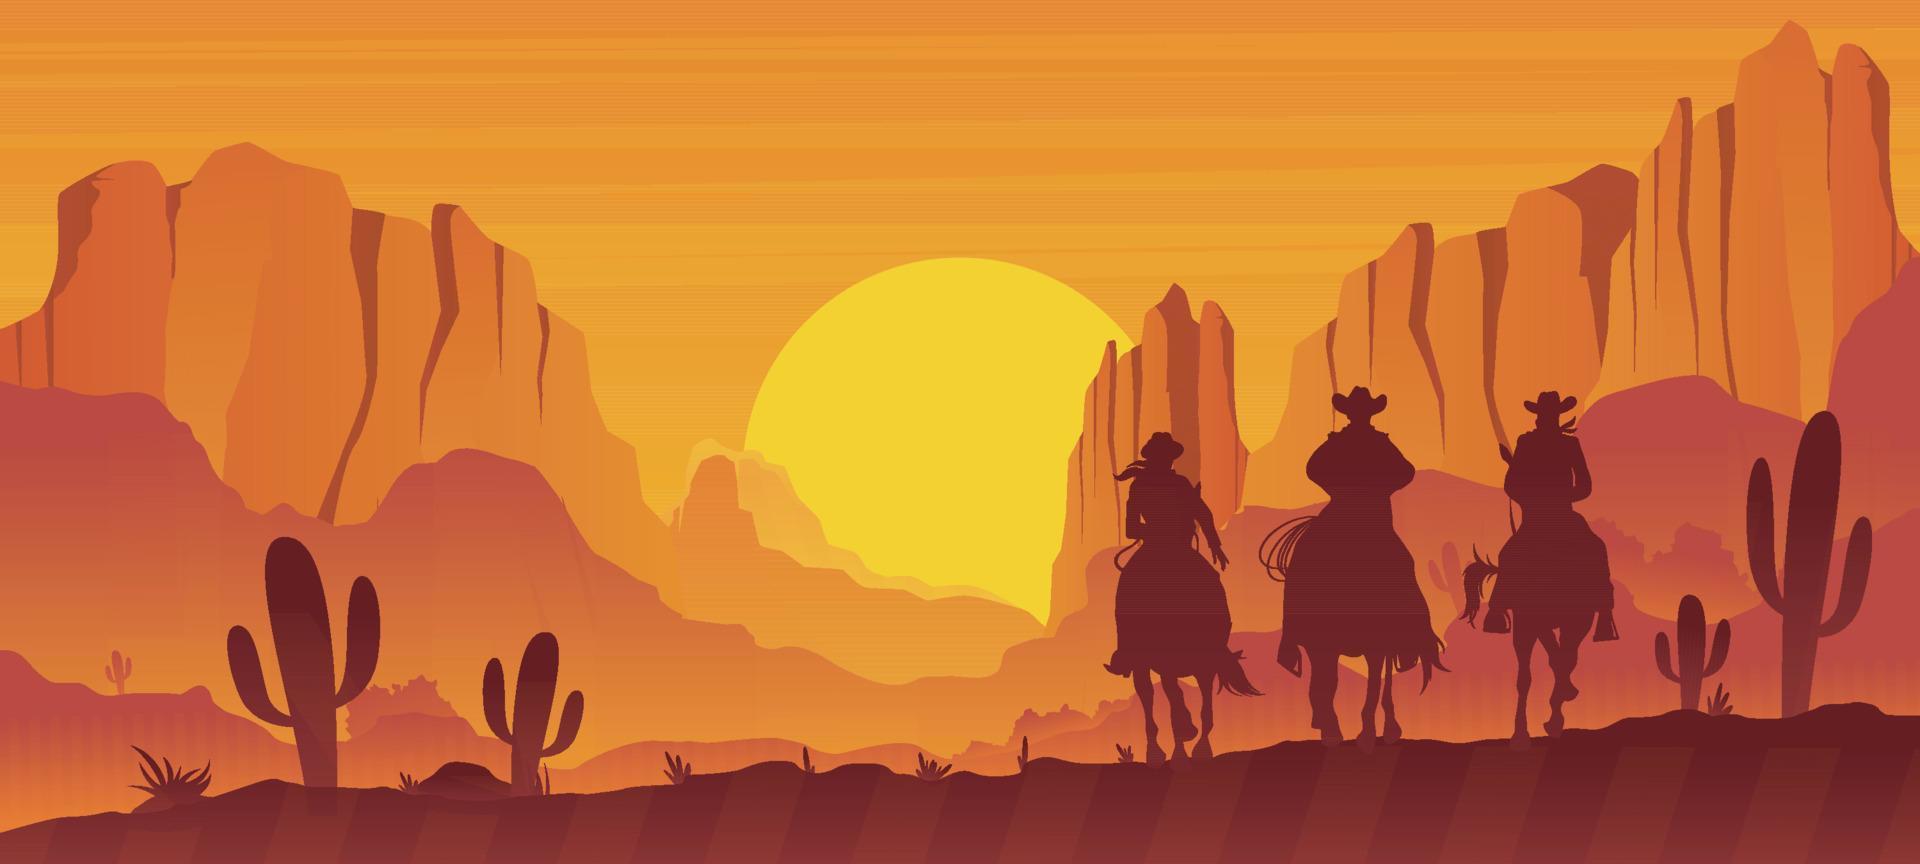 Cowboy Silhouette in the Desert vector